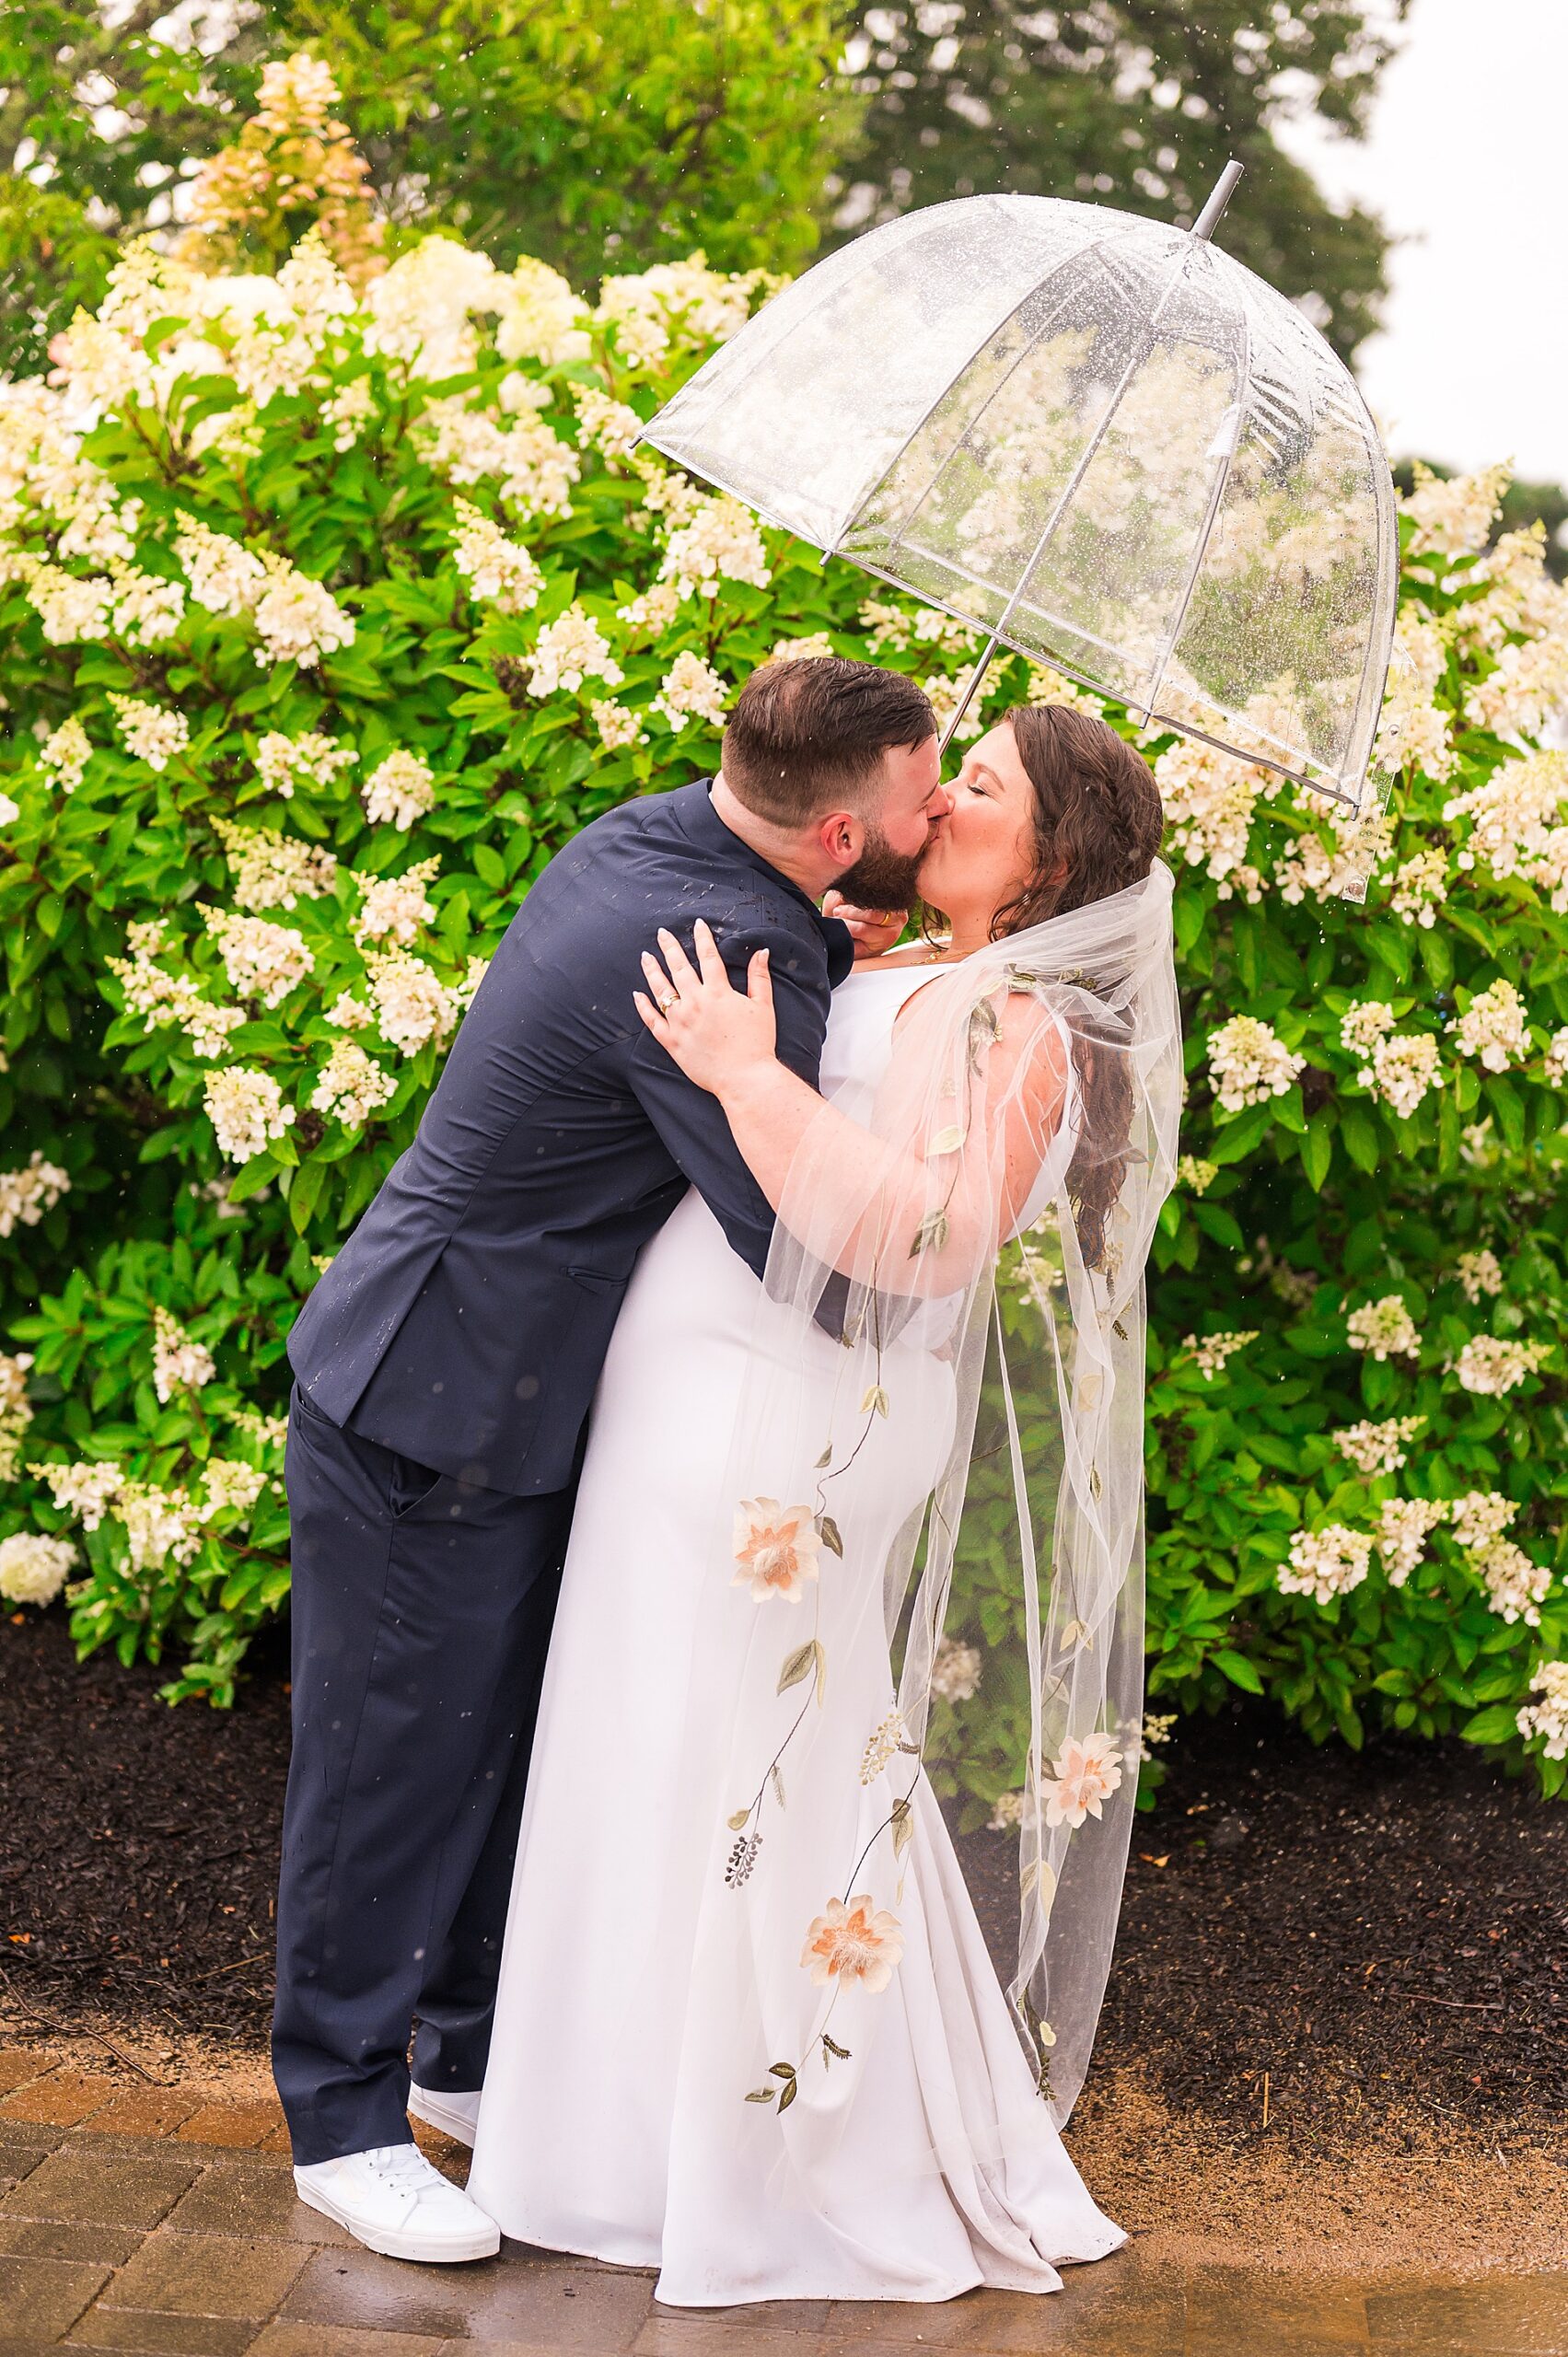 newlyweds kiss surrounded by blooming flowers 